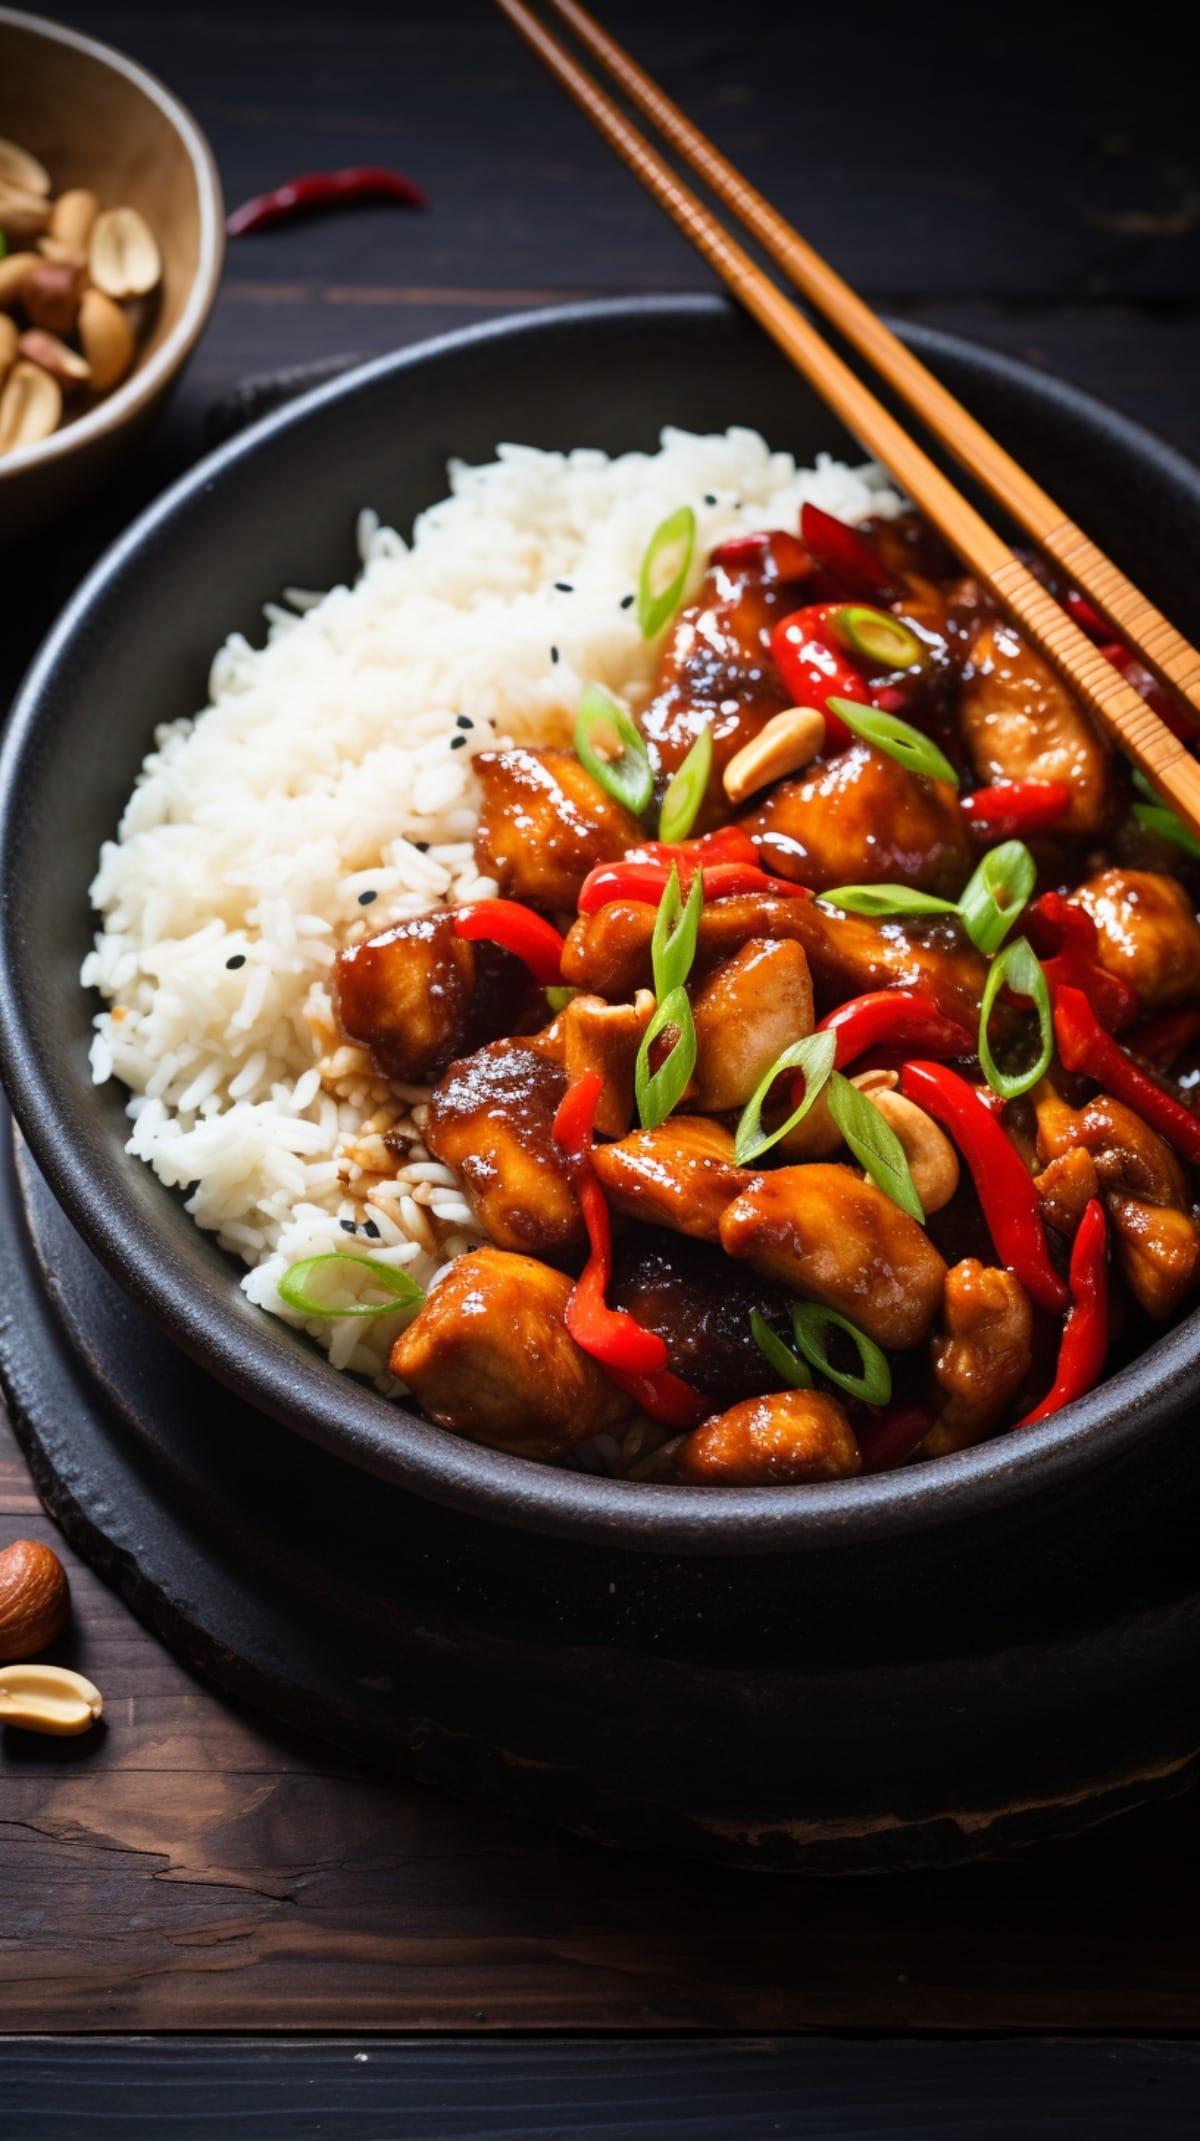 Kung Pao Chicken and Rice